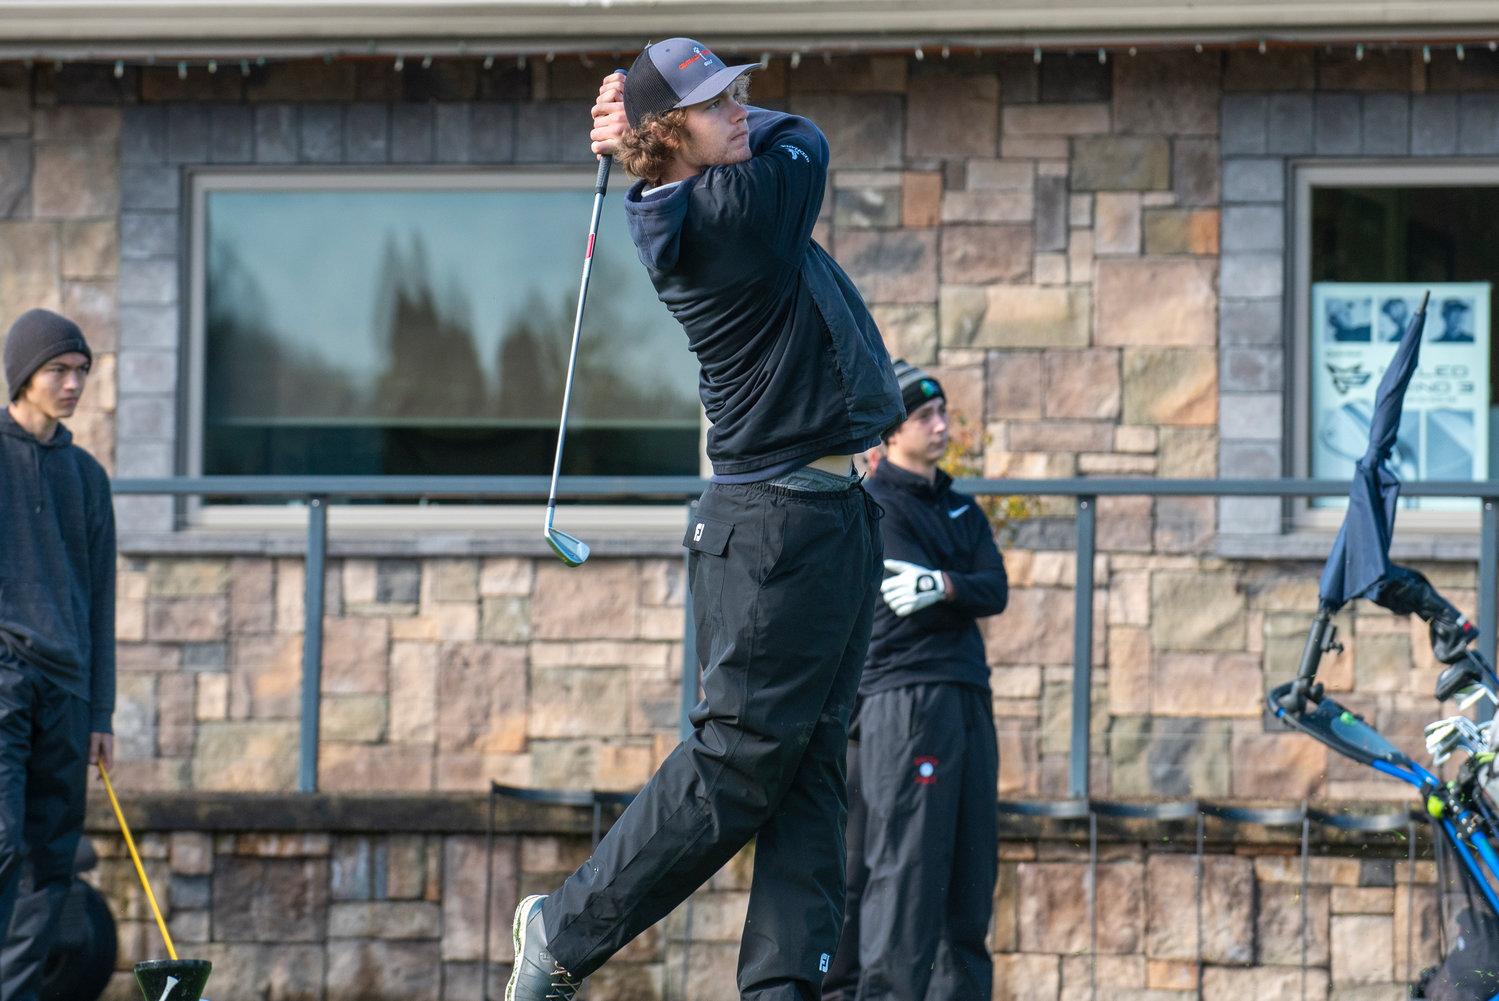 Centralia senior Cole Wasson tees off on Day One of the 2A District 4 Boys Golf Tournament at Riverside Golf Course in Chehalis on Oct. 20, 2021.